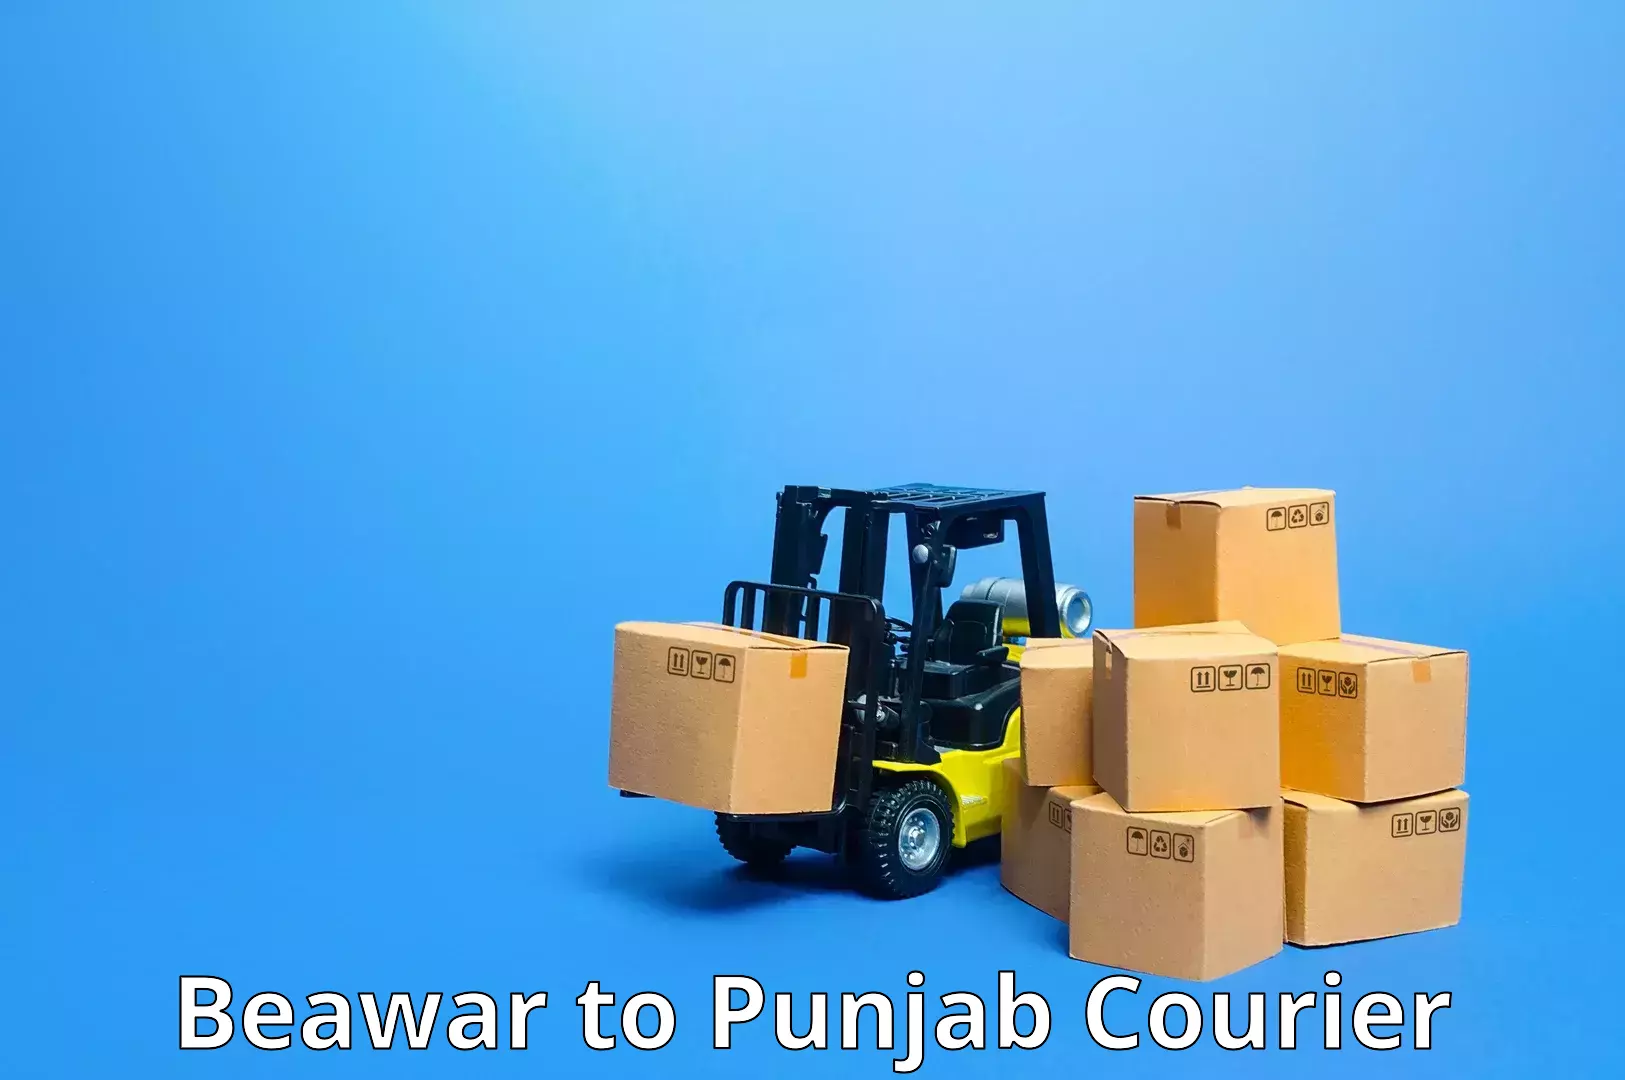 State-of-the-art courier technology Beawar to Dharamkot